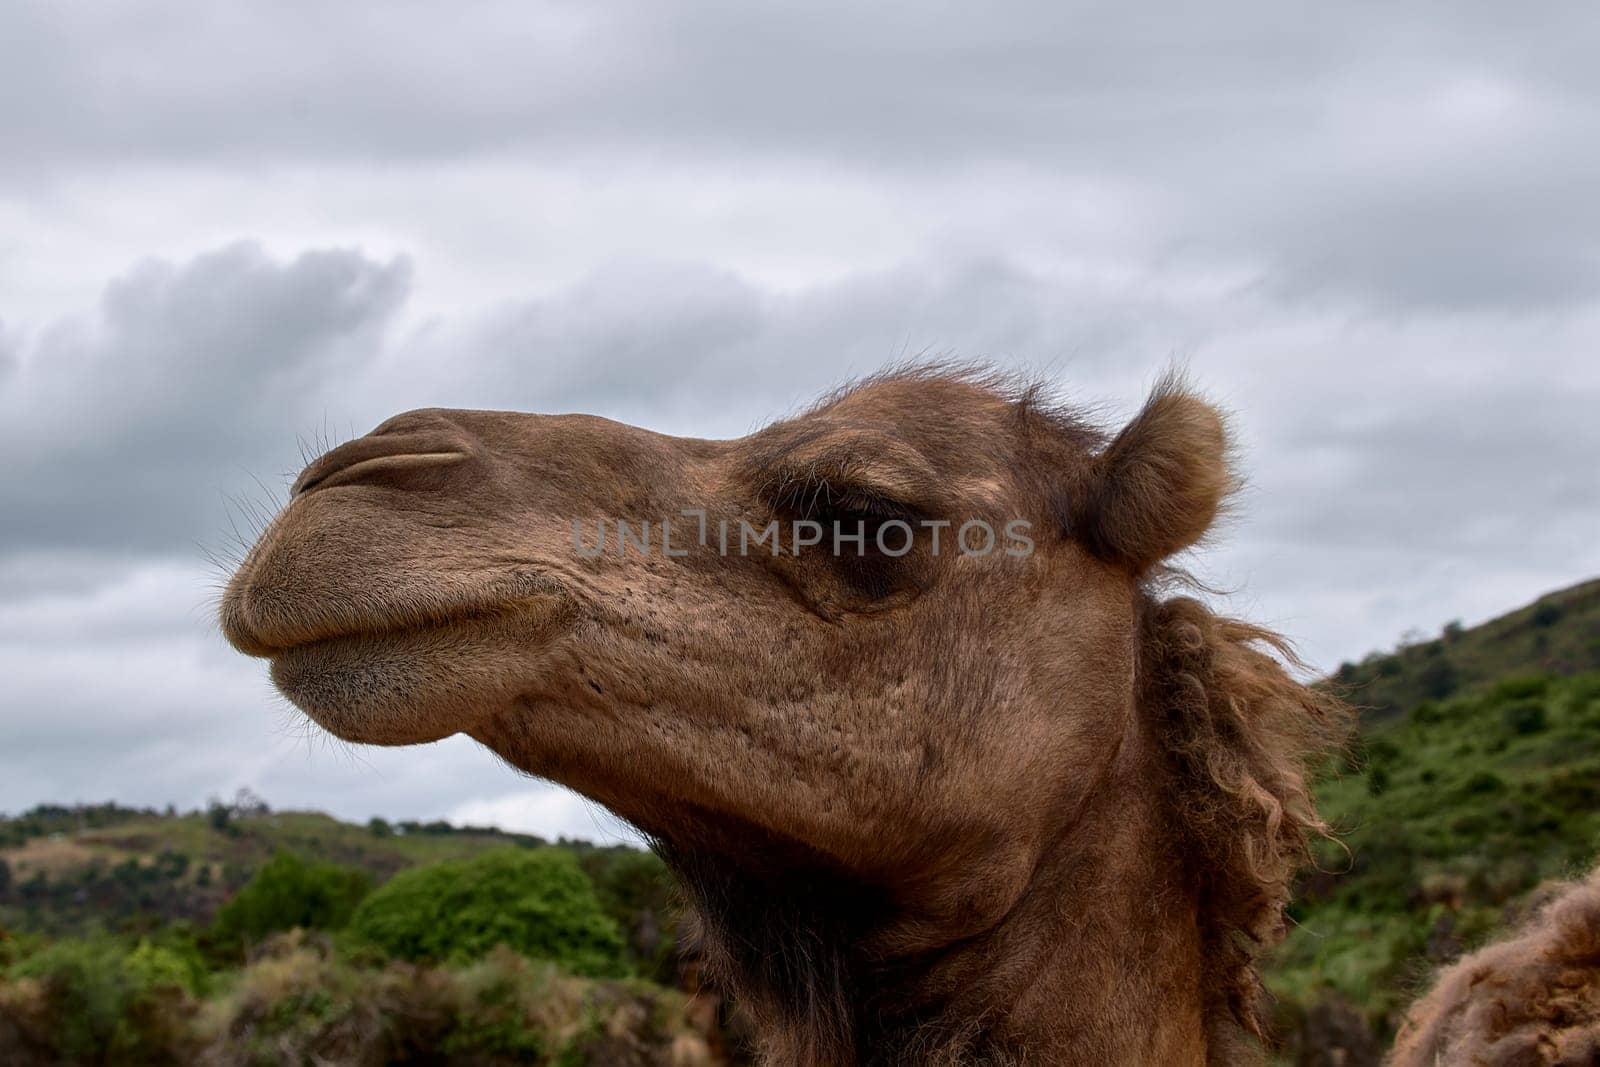 Detail of the head of a dromedary. Cloudy sky, texture, hairs, eye, nose, nose mouth smile